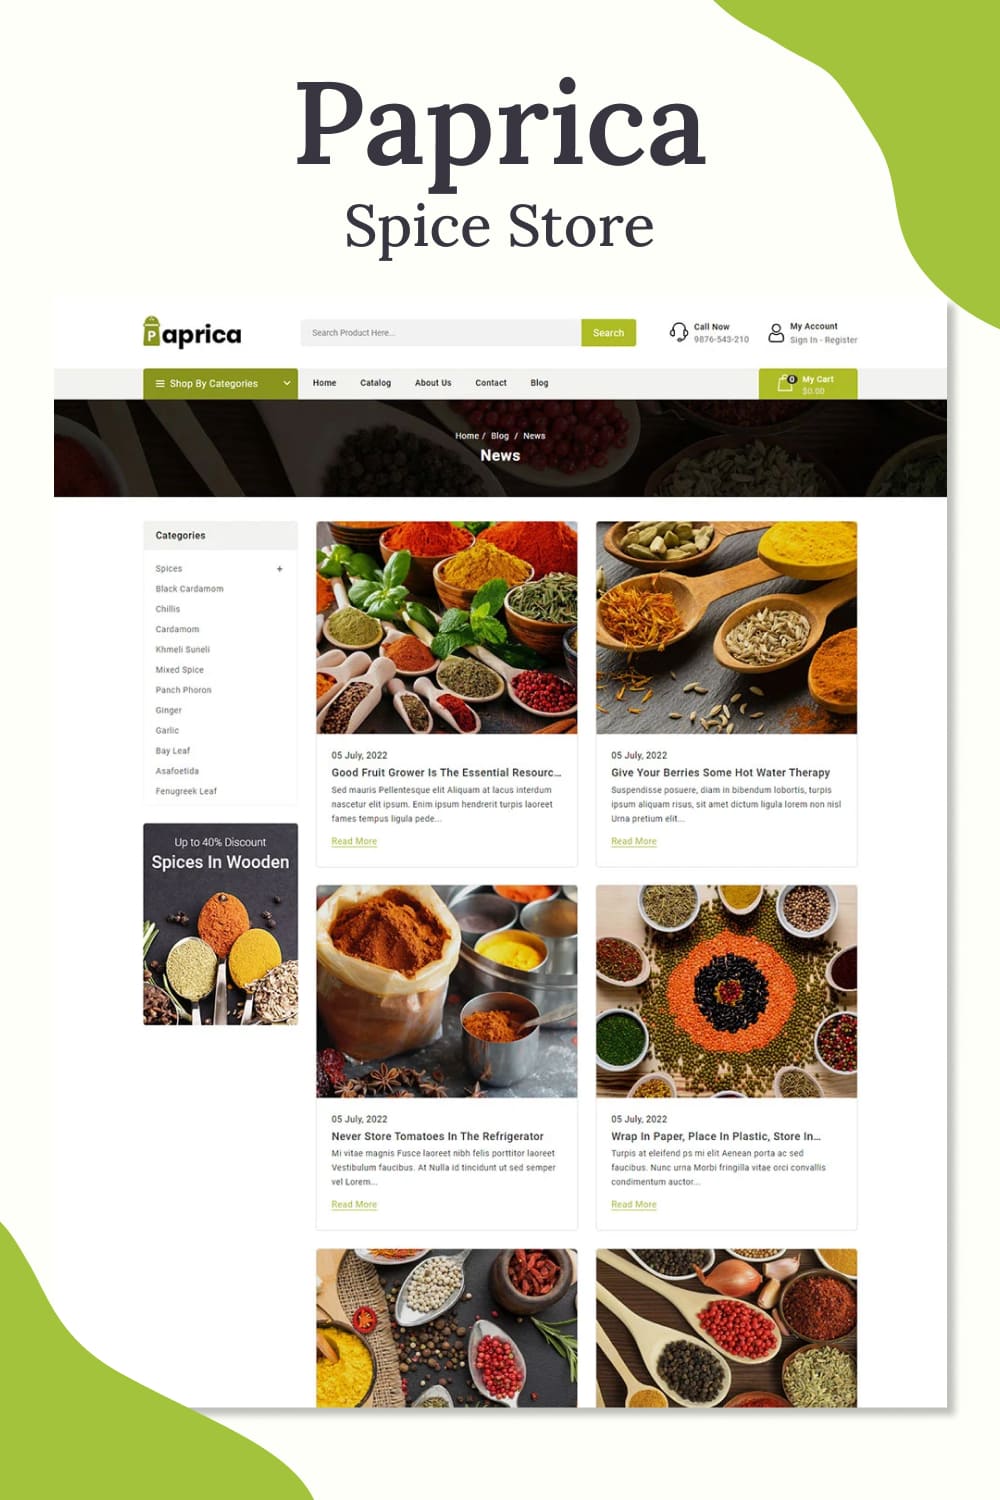 Paprica spice store shopify 2.0 responsive theme, picture for pinterest.